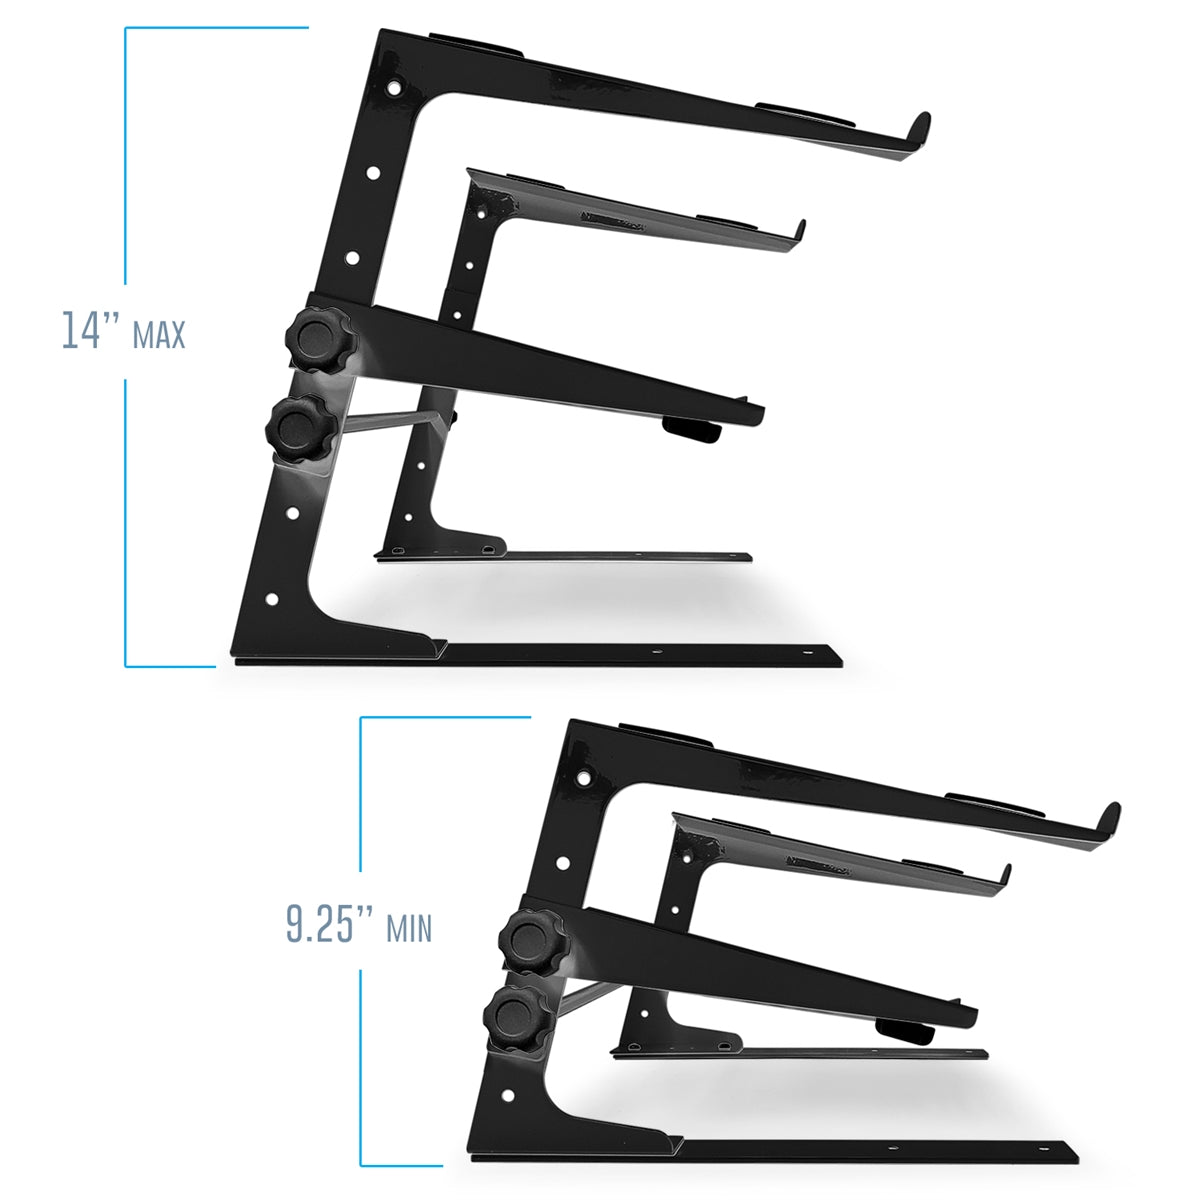 Portable Folding Laptop Stand Black, AxcessAbles